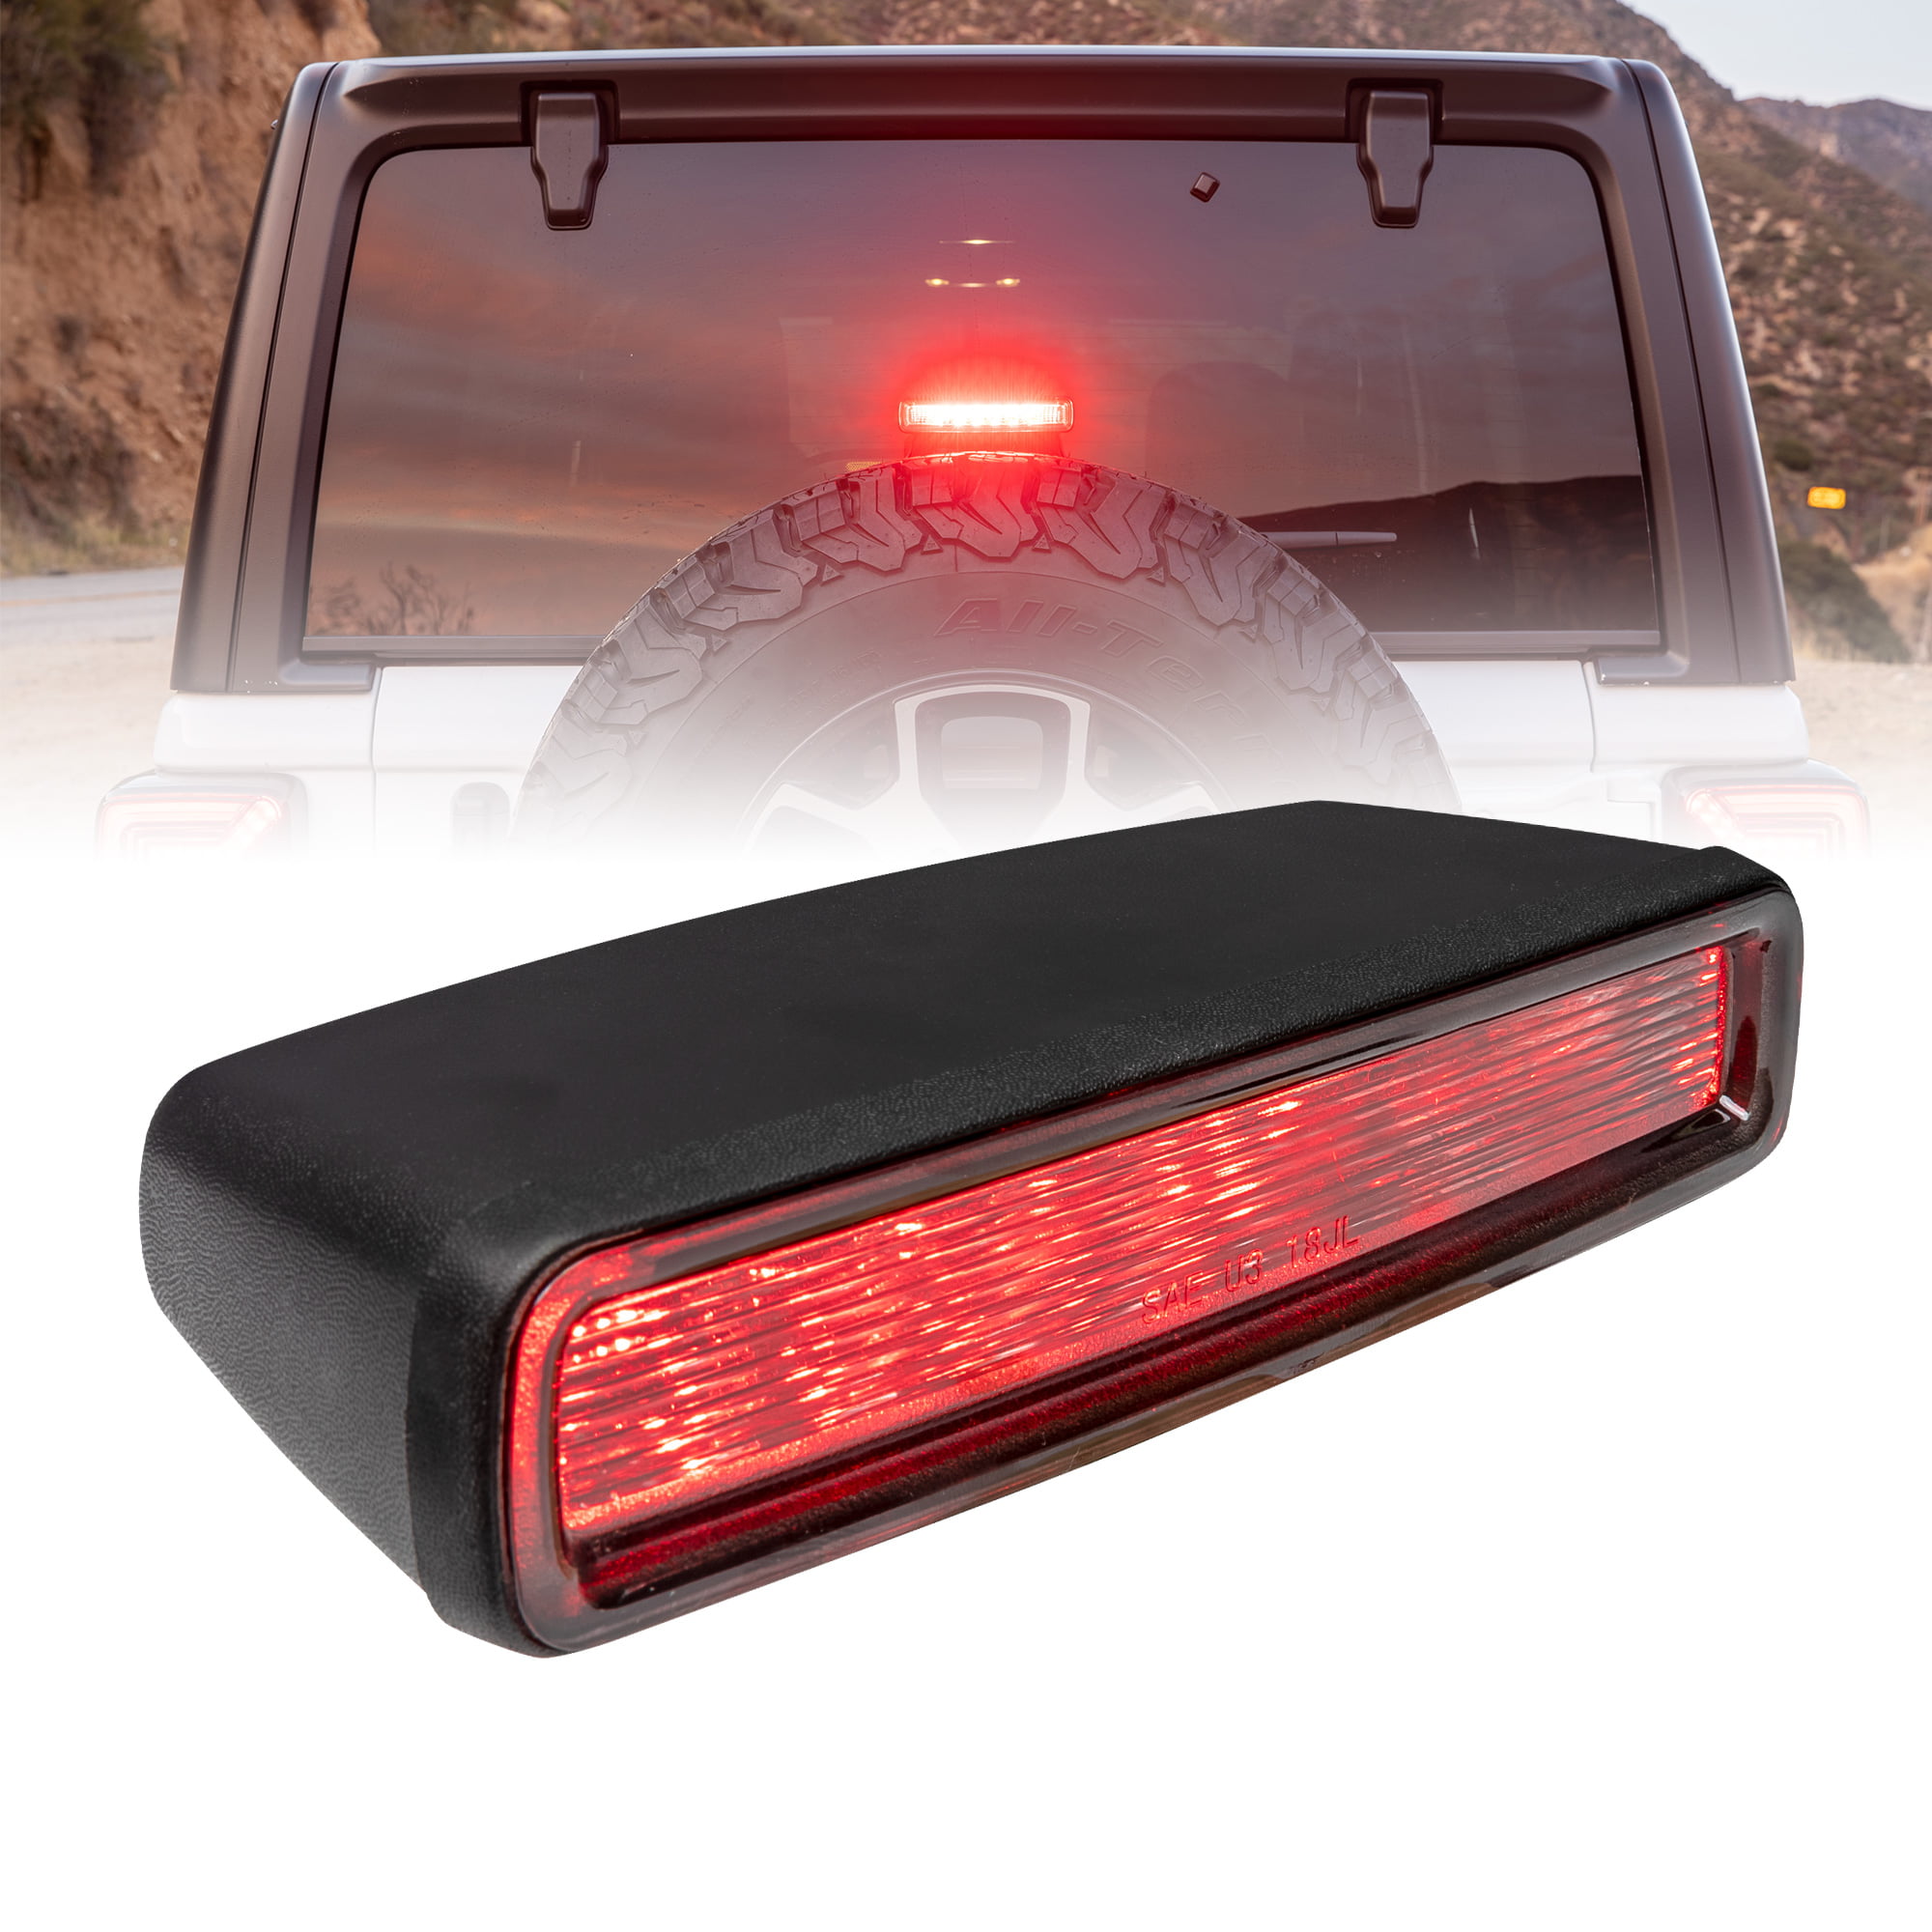 LED Third Brake Light Replacement for Jeep 2018+ Wrangler JL [Smoked Lens]  [Plug-n-Play] [IP67 Waterproof] [Diffused Lens] 3rd Brake Light Compatible  with Jeep Wrangler JL Accessories 